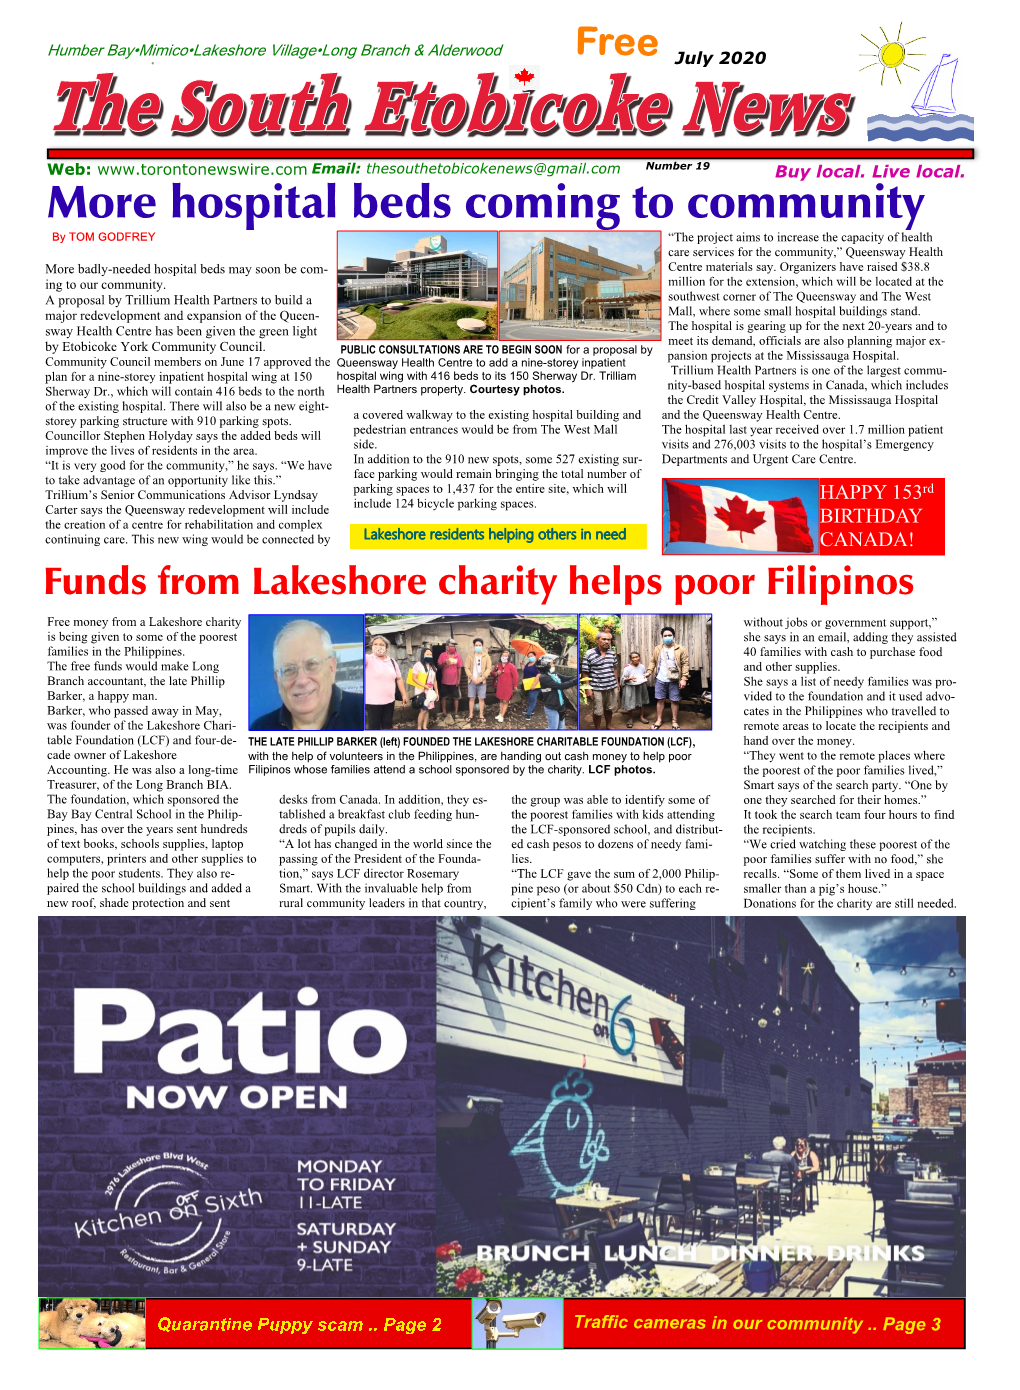 Hospital Beds Coming to Community